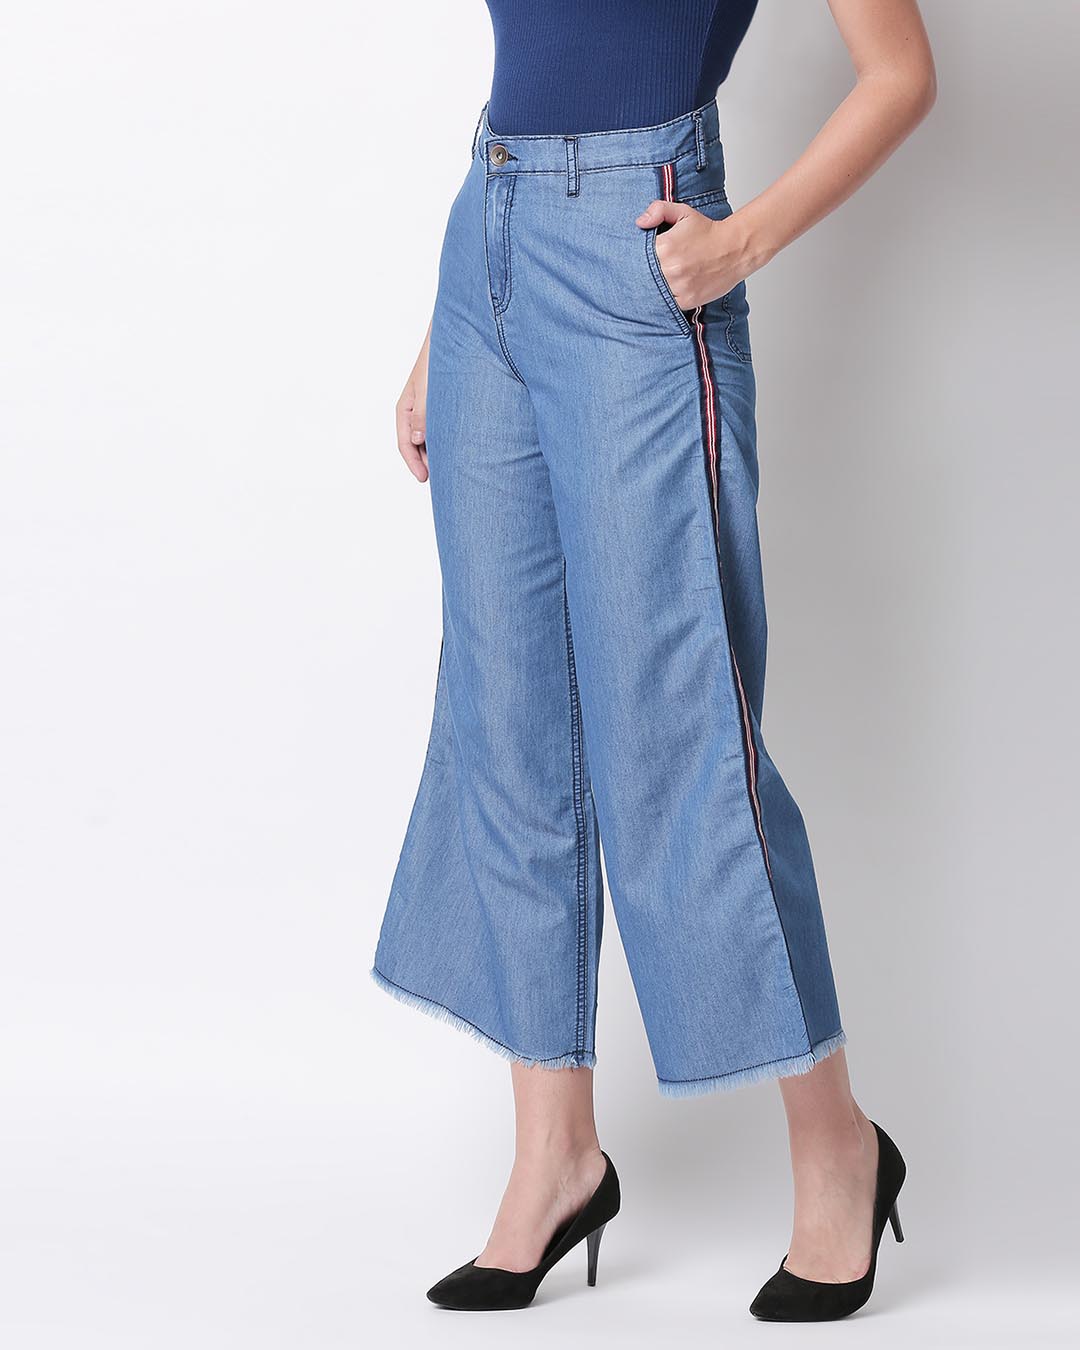 Shop Women's Blue Washed Slim Fit High Waist Palazzo-Back